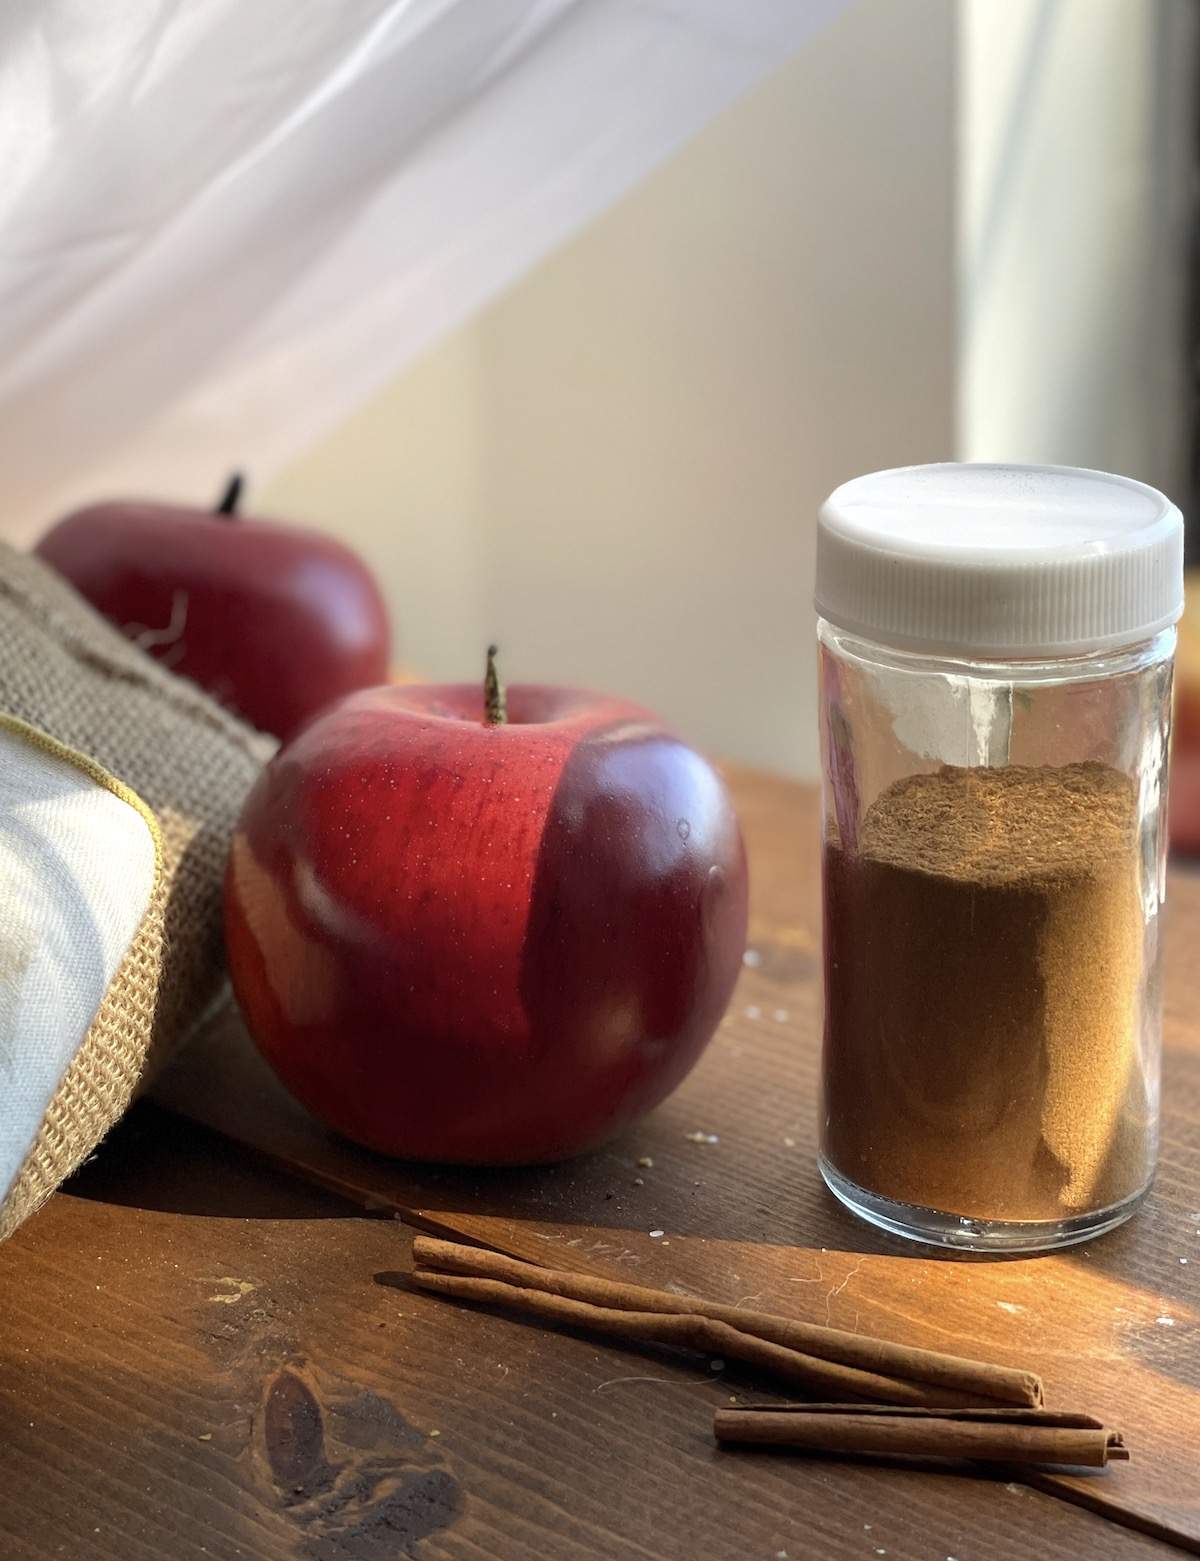 A jar of homemade apple pie spice next to an apple.